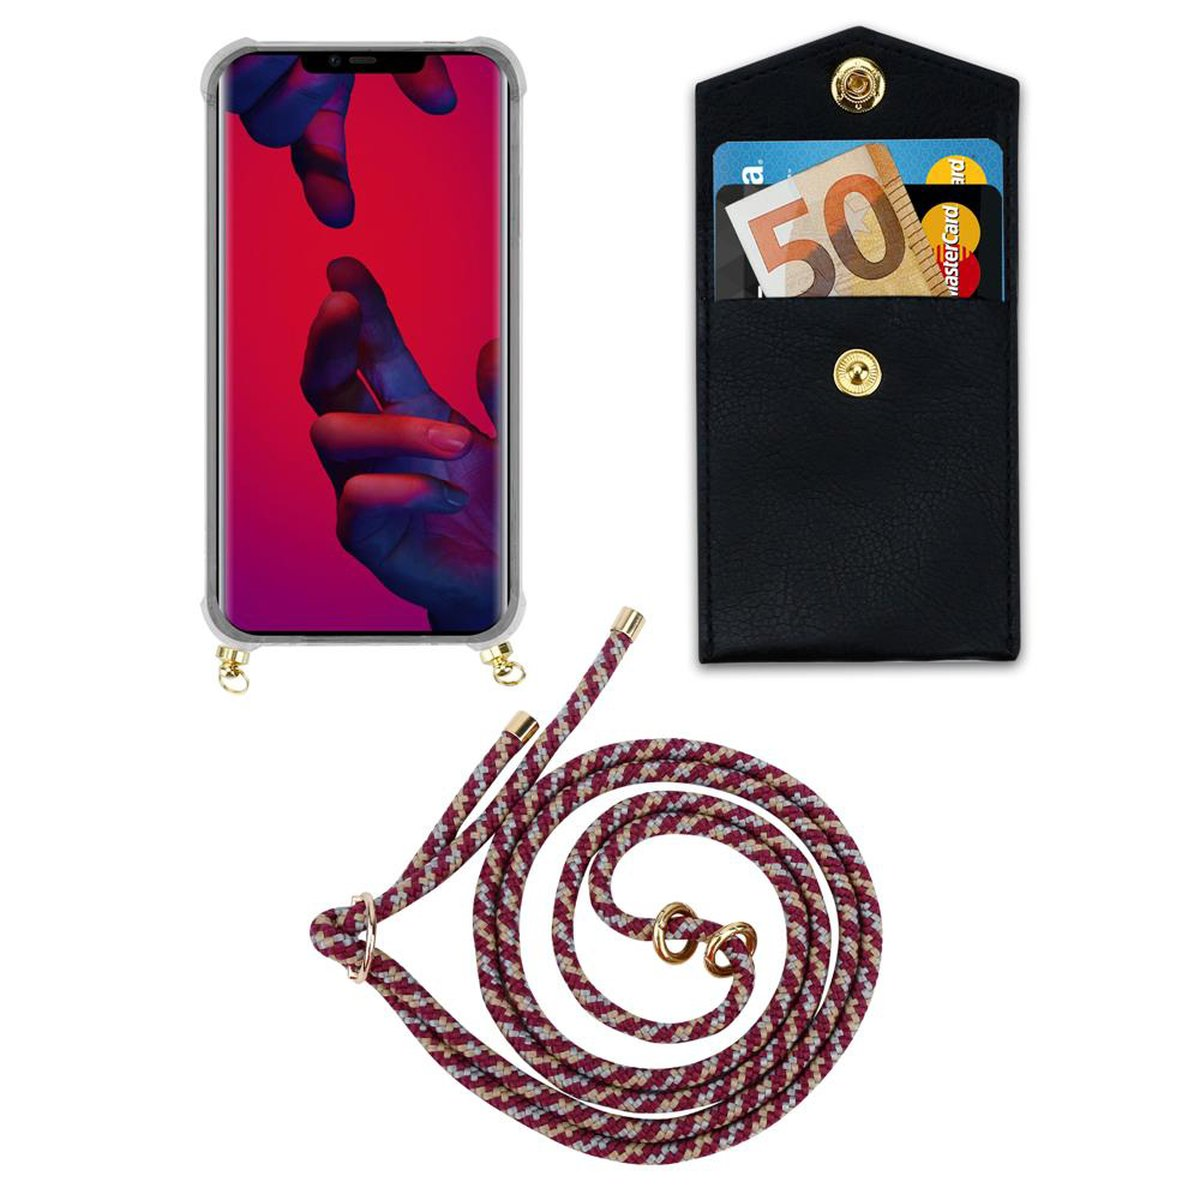 CADORABO Handy Kette mit WEIß MATE abnehmbarer PRO, Backcover, Huawei, Ringen, und GELB Kordel ROT Hülle, Band 20 Gold